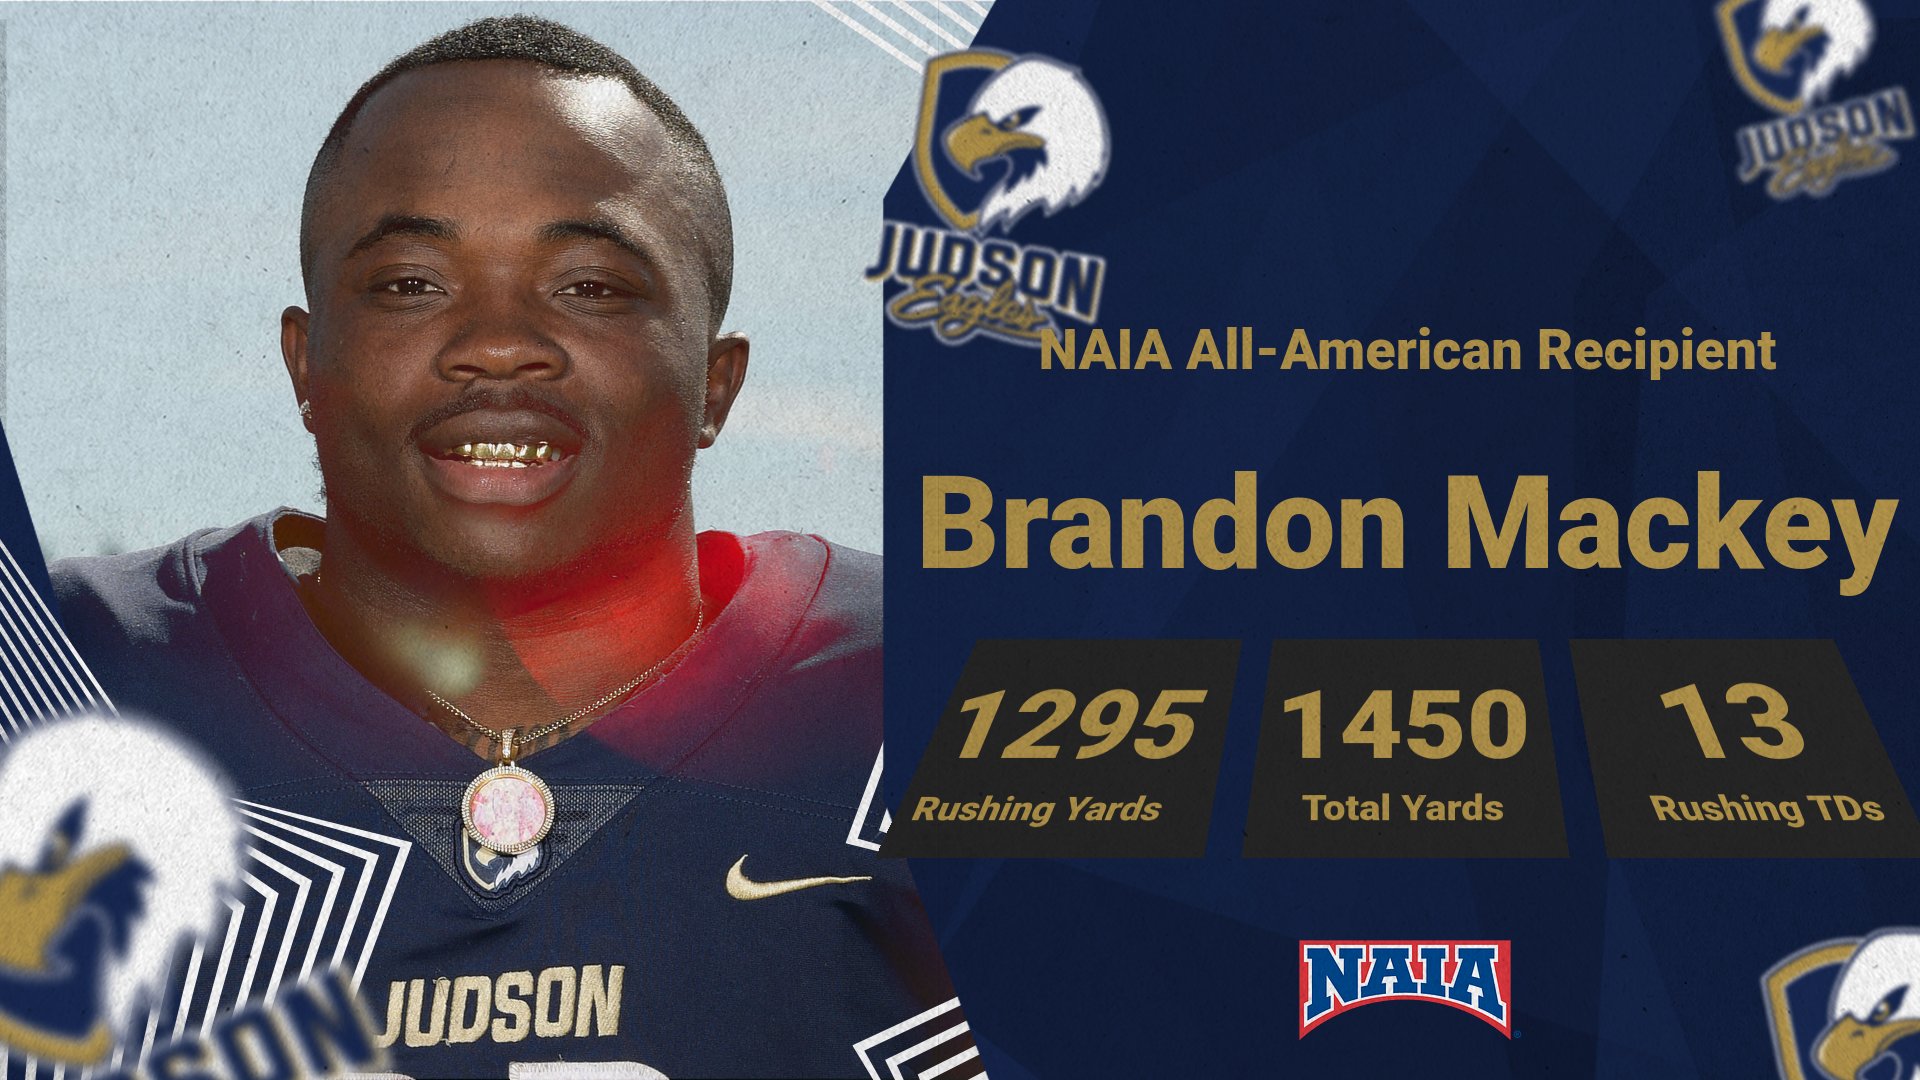 Mackey Becomes Second Eagle To Earn NAIA All-American Honors in Program History